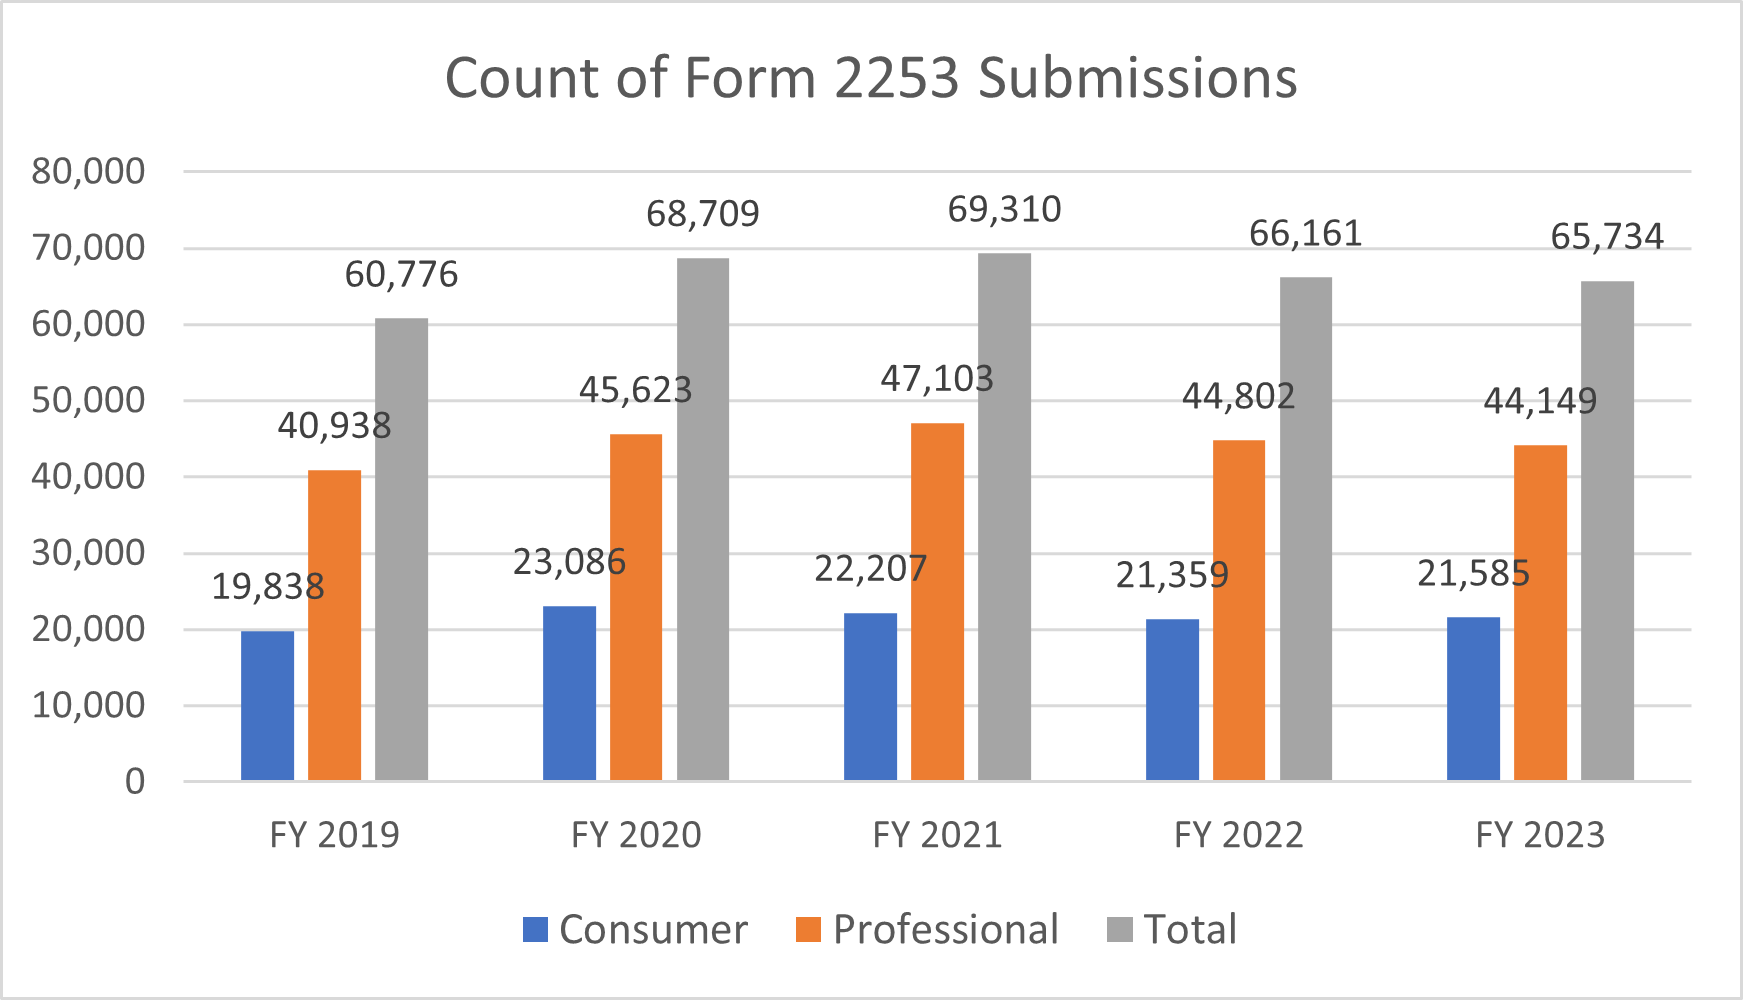 Count of Form 2253 Submissions